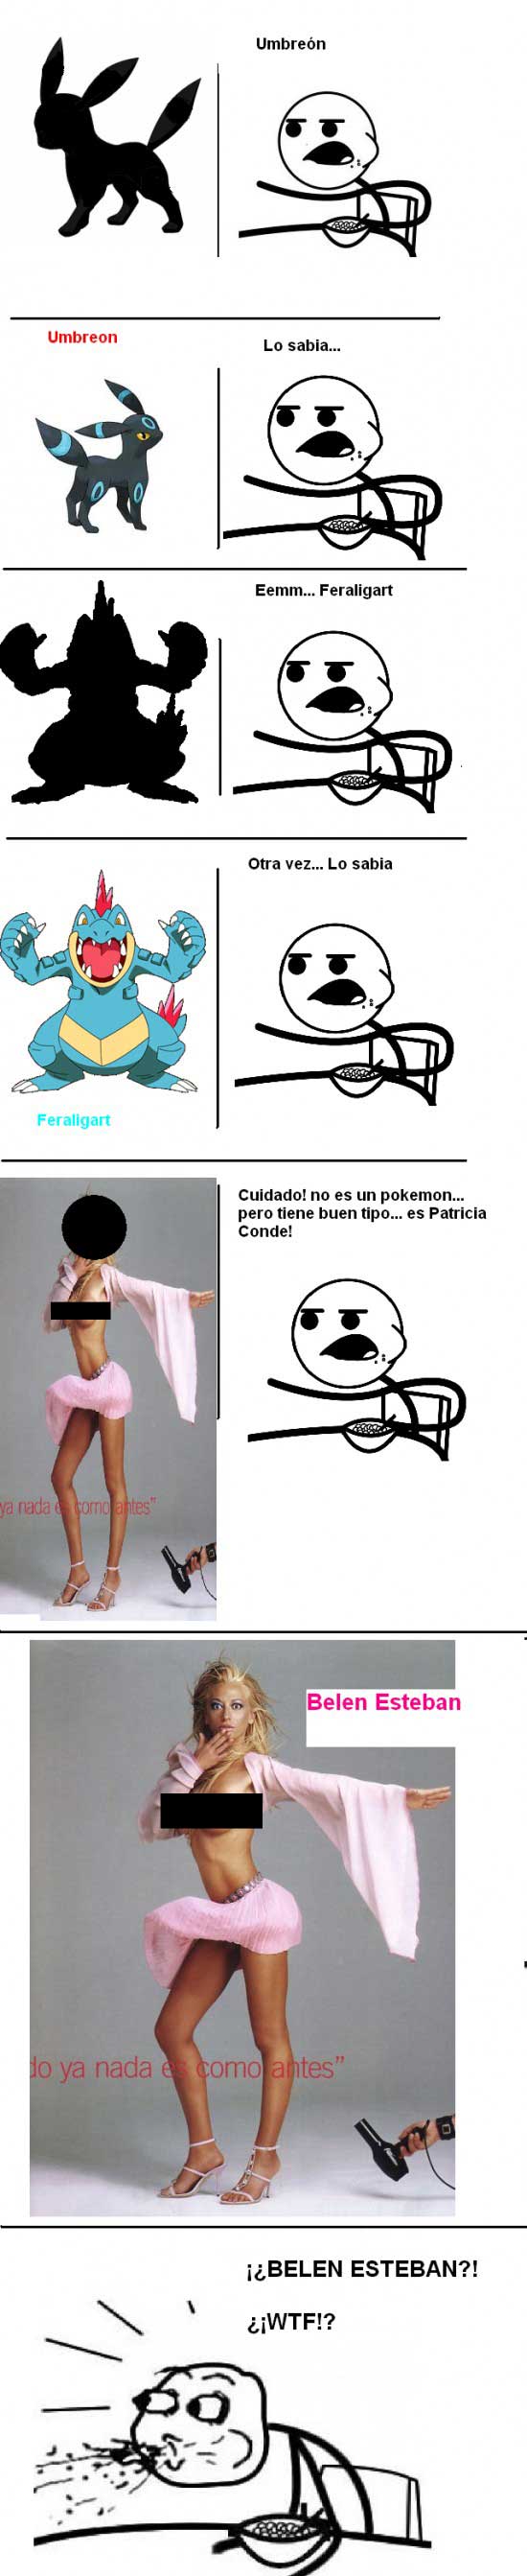 Cereal_guy - ¡Cereal guy!